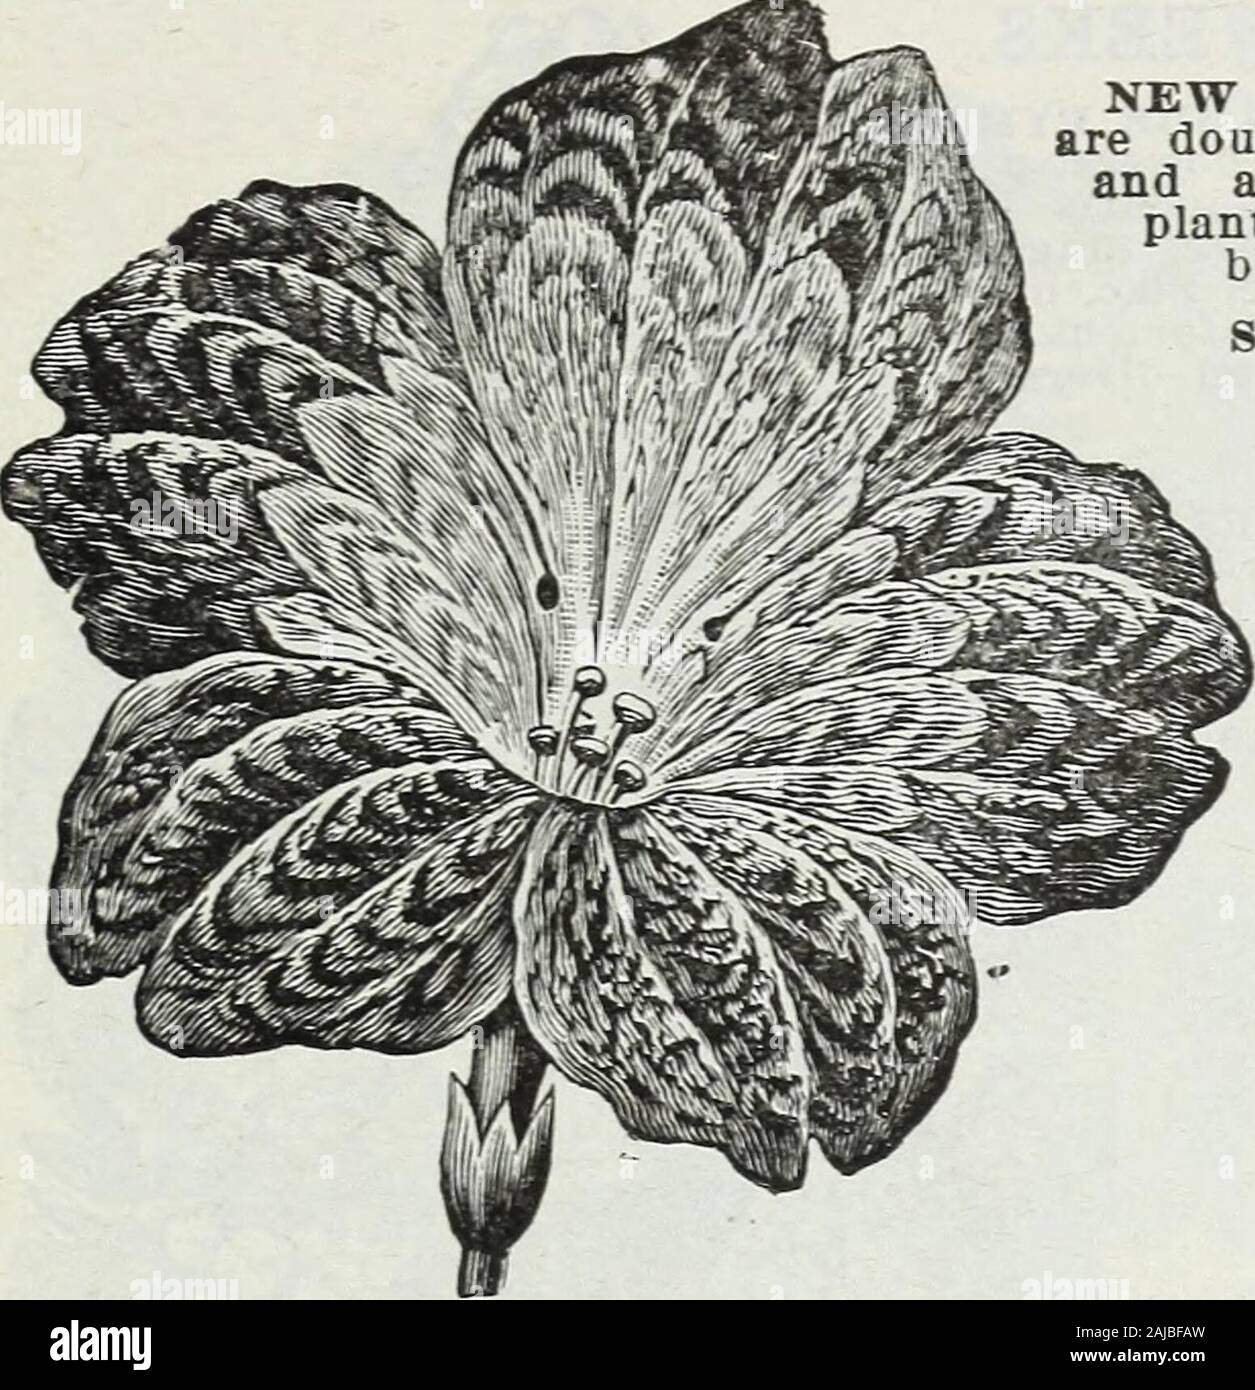 Lippincott seeds : 1914 . SCARLET SAGE,SALVIA SPLENDENS. MISS C. H. LIPPINCOTT, HUDSON, WISCONSIN. 43. SCABIOSA. SALPIGLOSIS. NEW GOLDEN YELLOW—The flowers are double, of a fine, pure yellow color, and are charming for bouquets. The plants are semi-dwarf and very free blooming. Pkt., 50 seeds, 3 cts. SNOWBALIi—The flowers are very large, measuring fully two inches in diameter, of purest white and very double. It comes quite true from seed. Pkt., 50 seeds, 3 cts. DOUBLE BLACK—A new va-riety, with elegant double-black,purple flowers, so deep in coloras to appear nearly coal black.Pkt., 50 seeds, Stock Photo